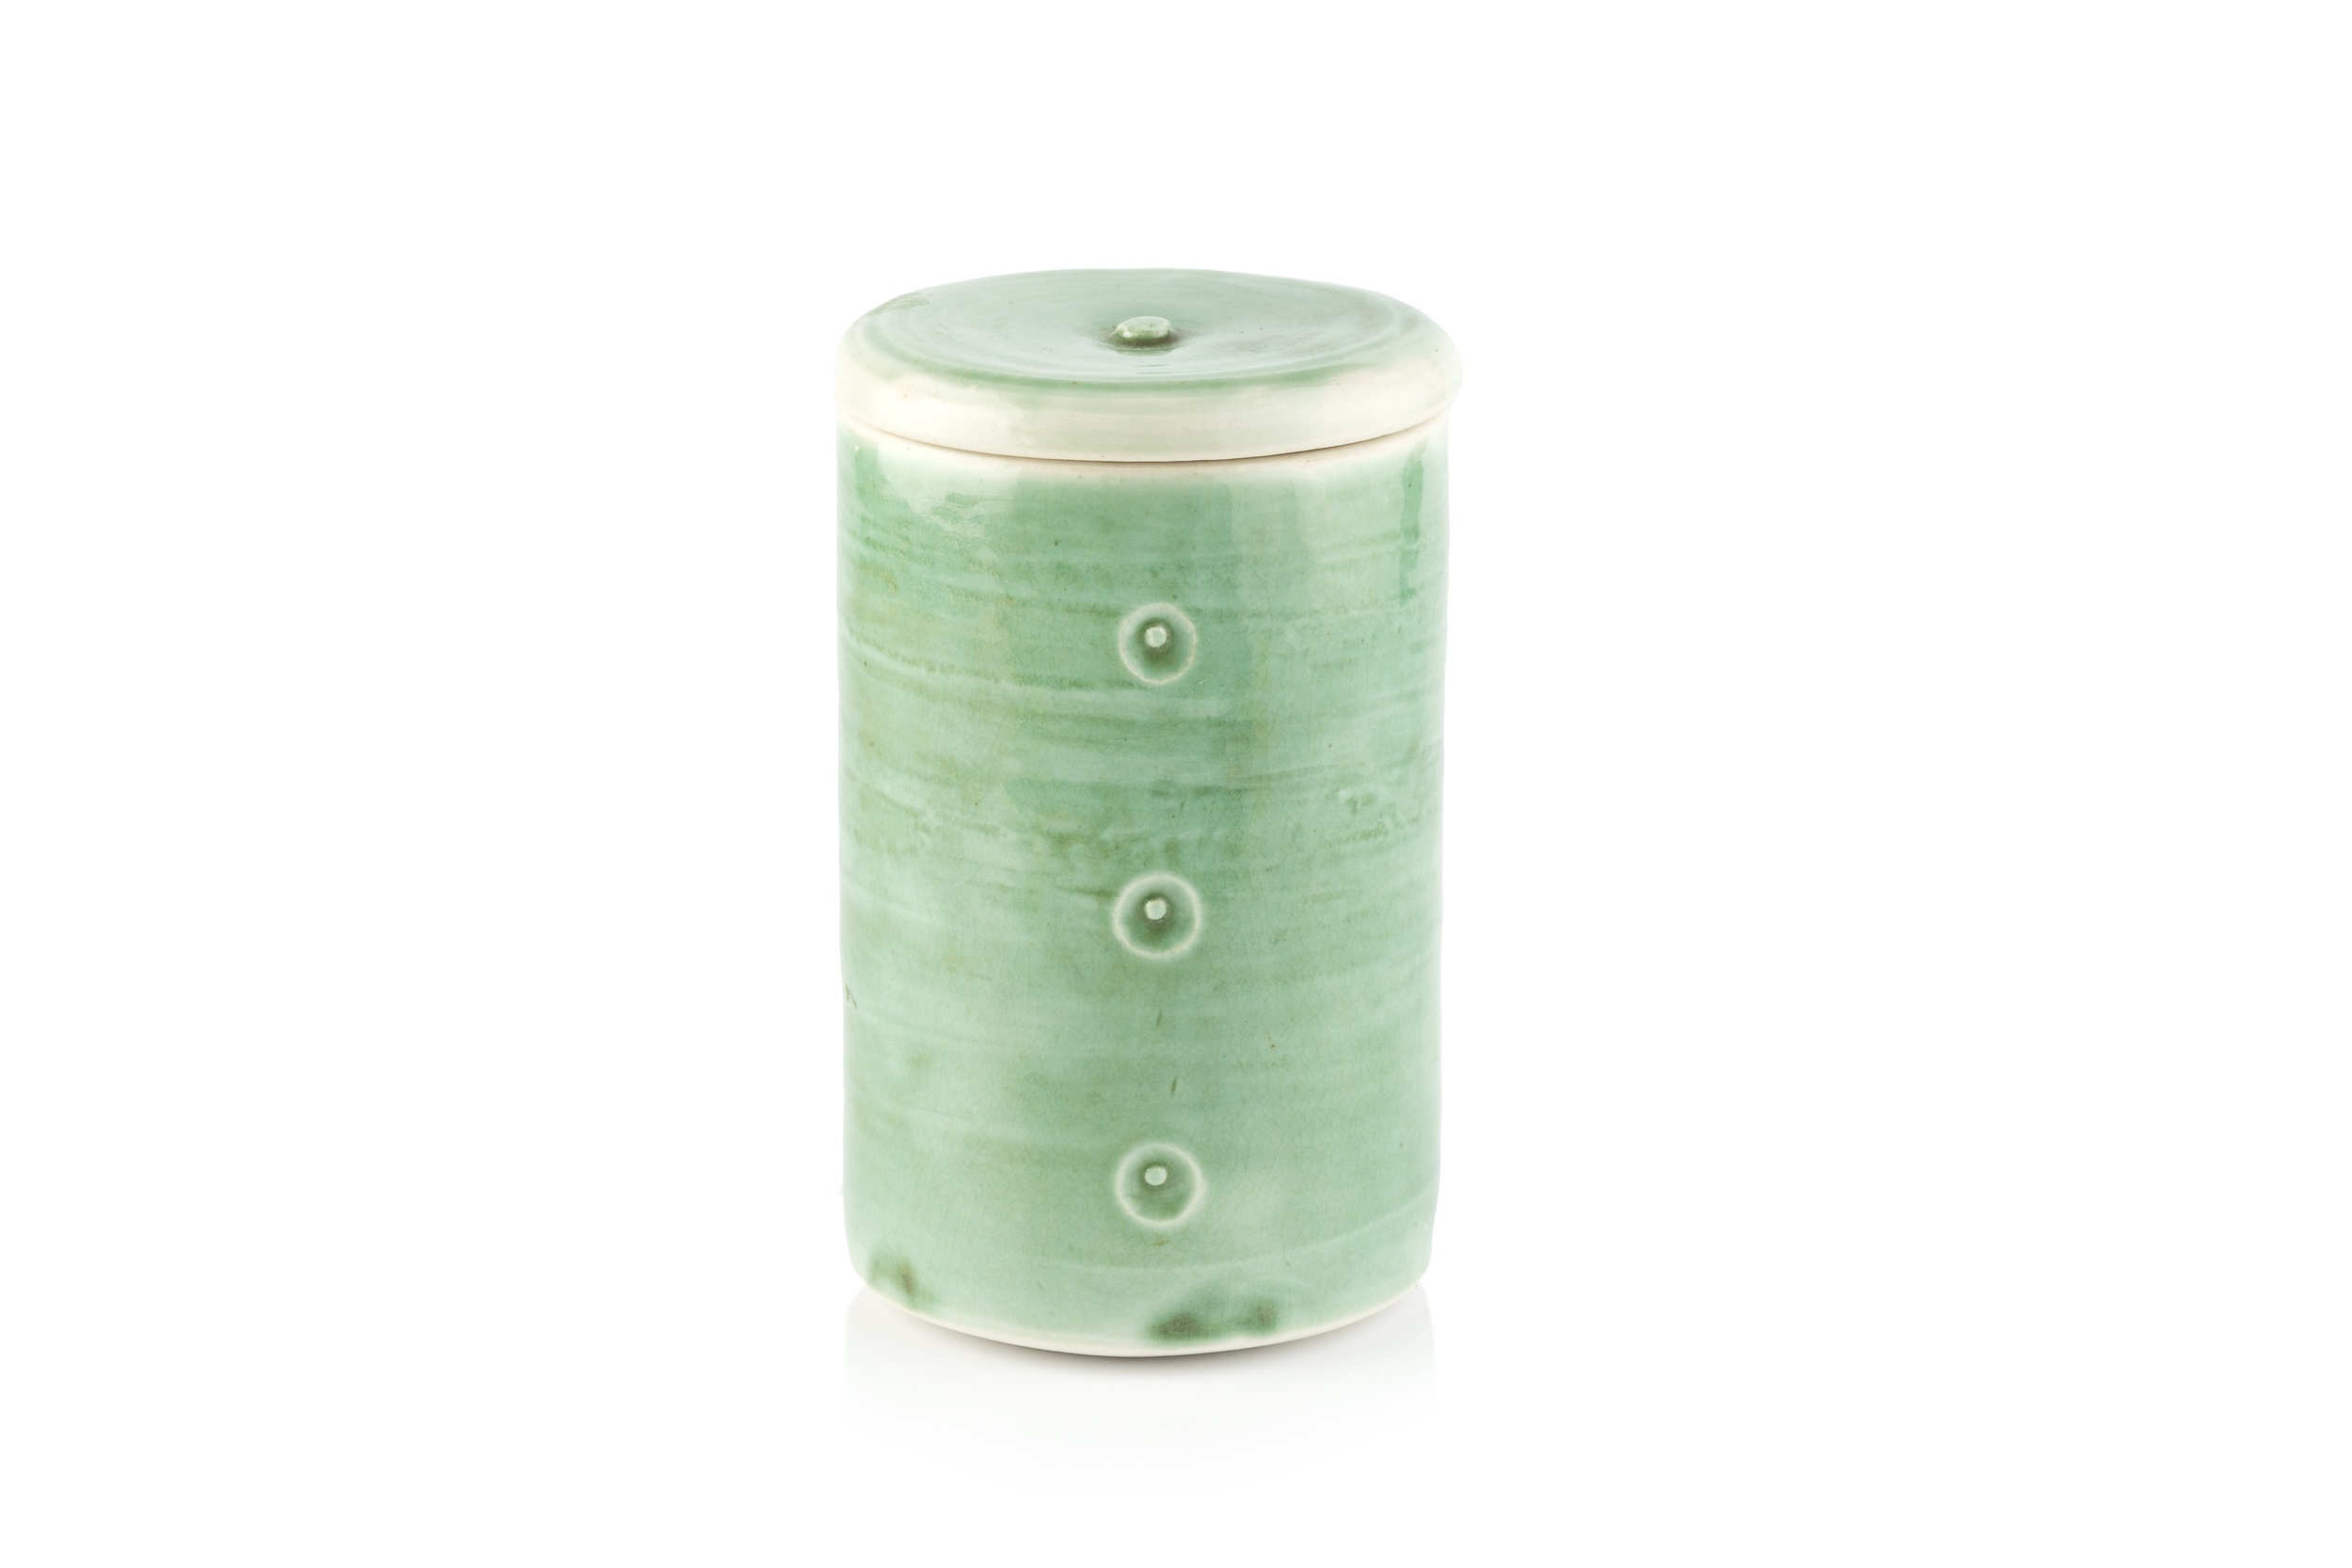 William 'Bill' Marshall (1923-2007) Tea caddy and cover porcelain, with green glaze and incised